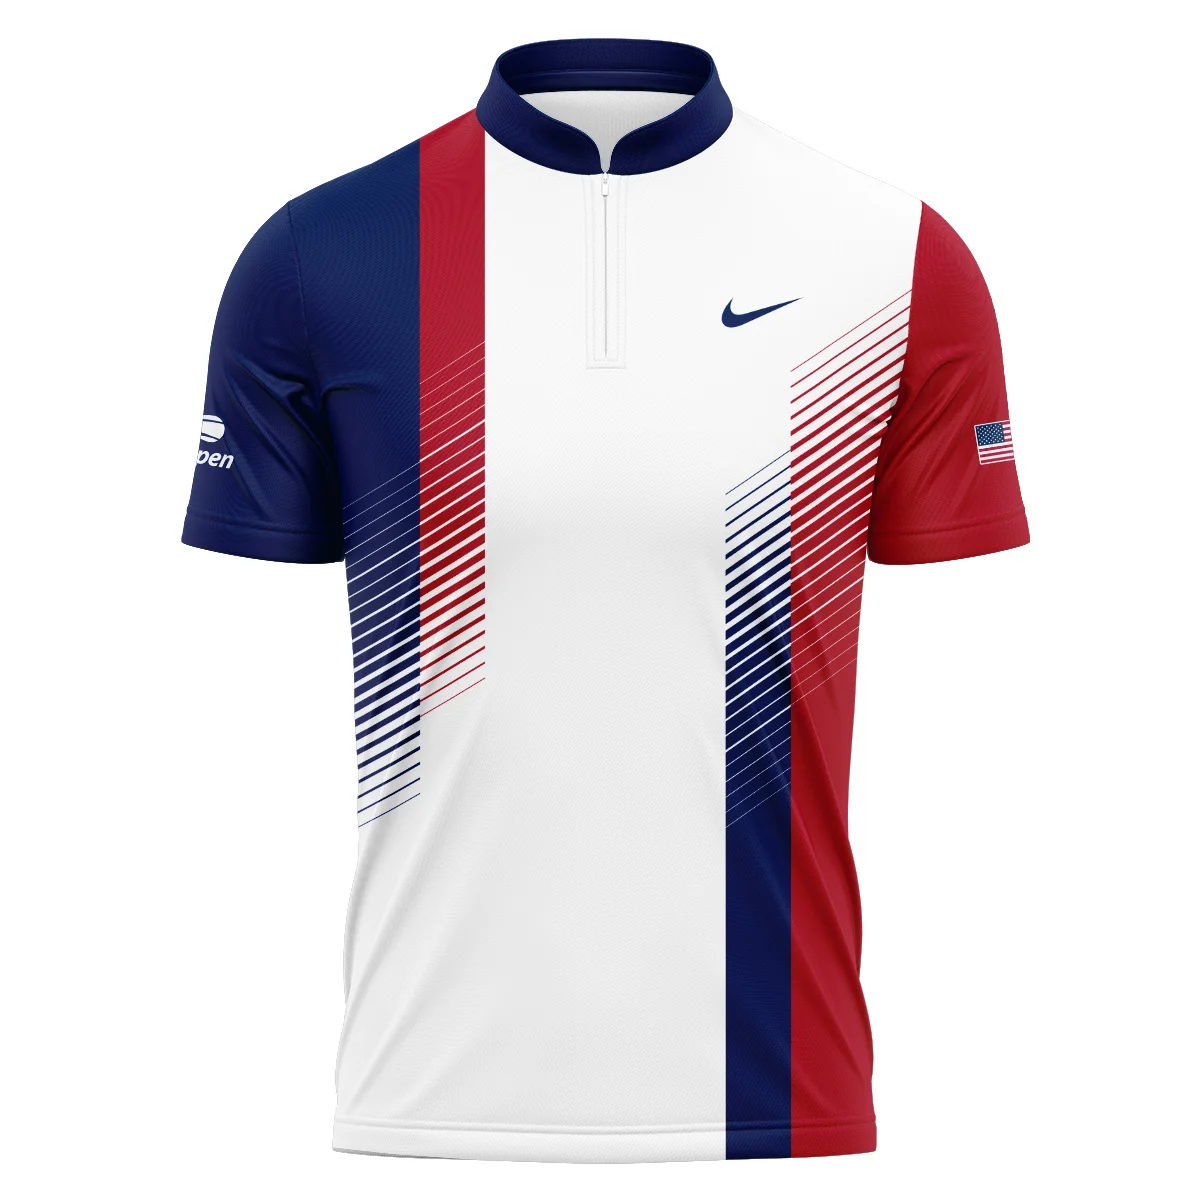 Nike Blue Red Straight Line White US Open Tennis Champions Unisex T-Shirt Style Classic T-Shirt